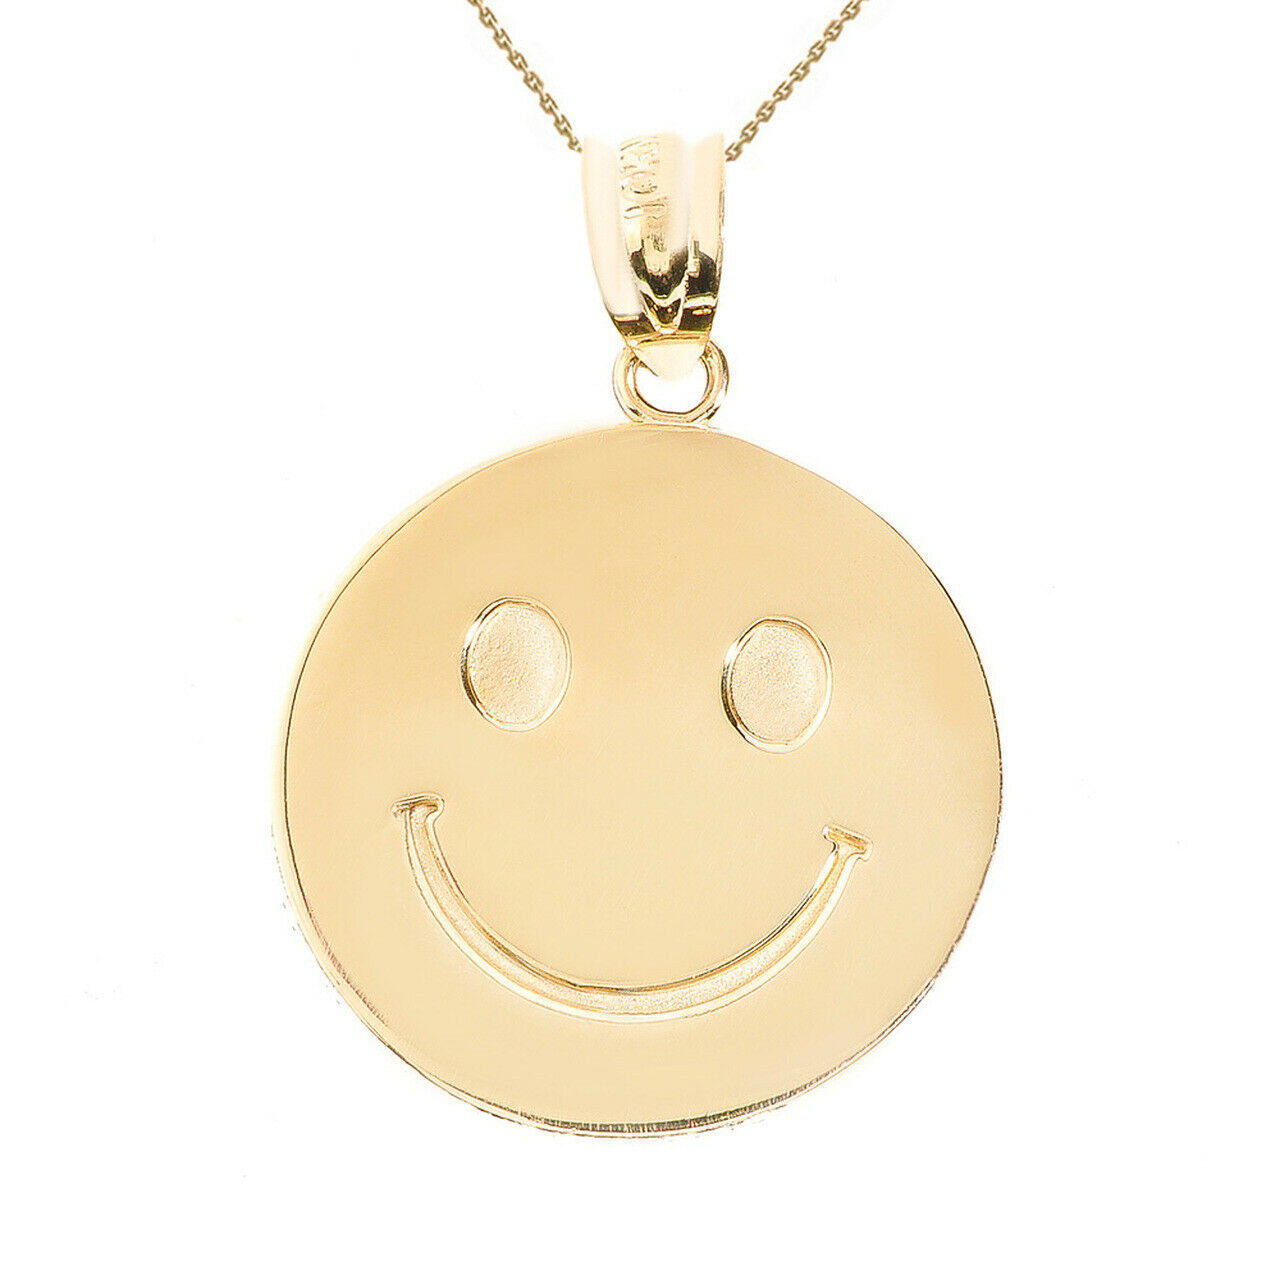 Primary image for 14k Solid Yellow Gold Smiley Face Disc Charm Pendant Necklace